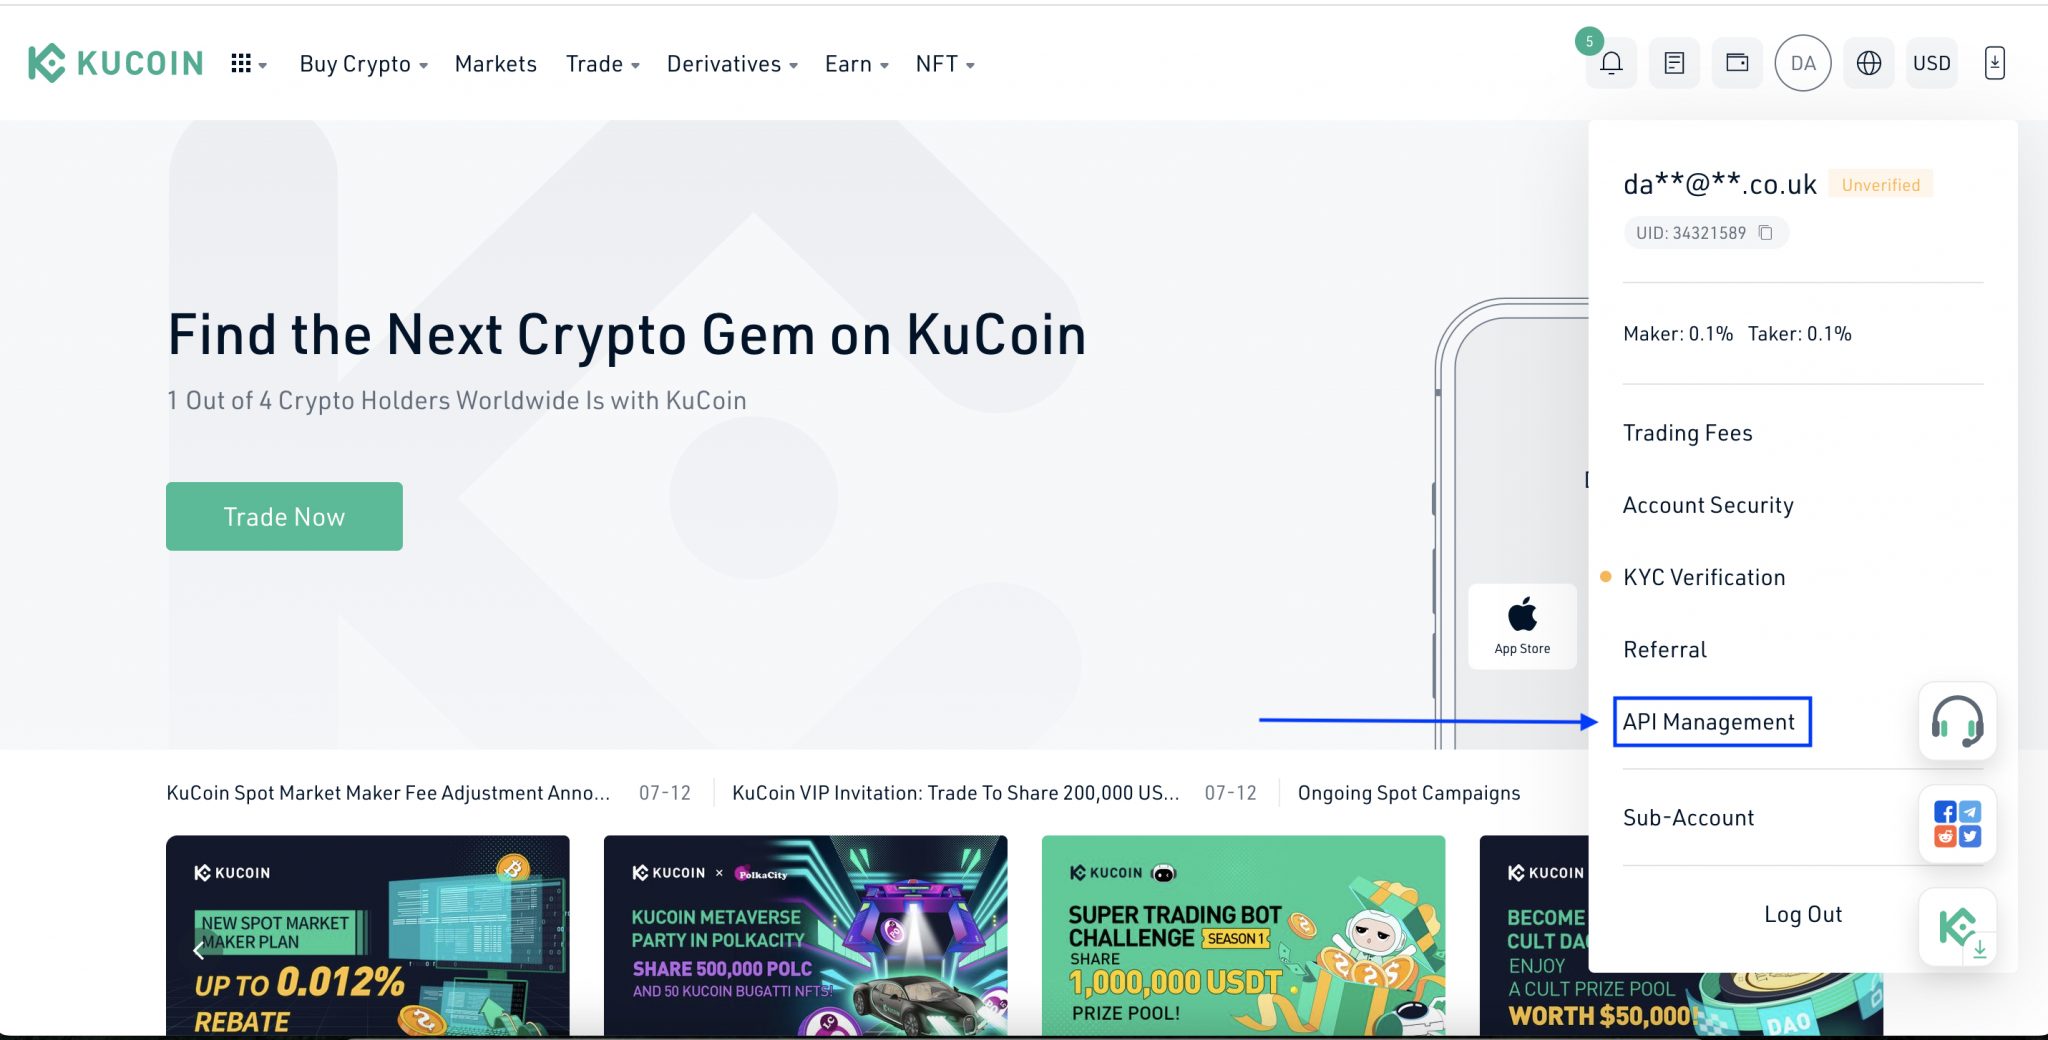 kucoin api v2 how to tell if order is open